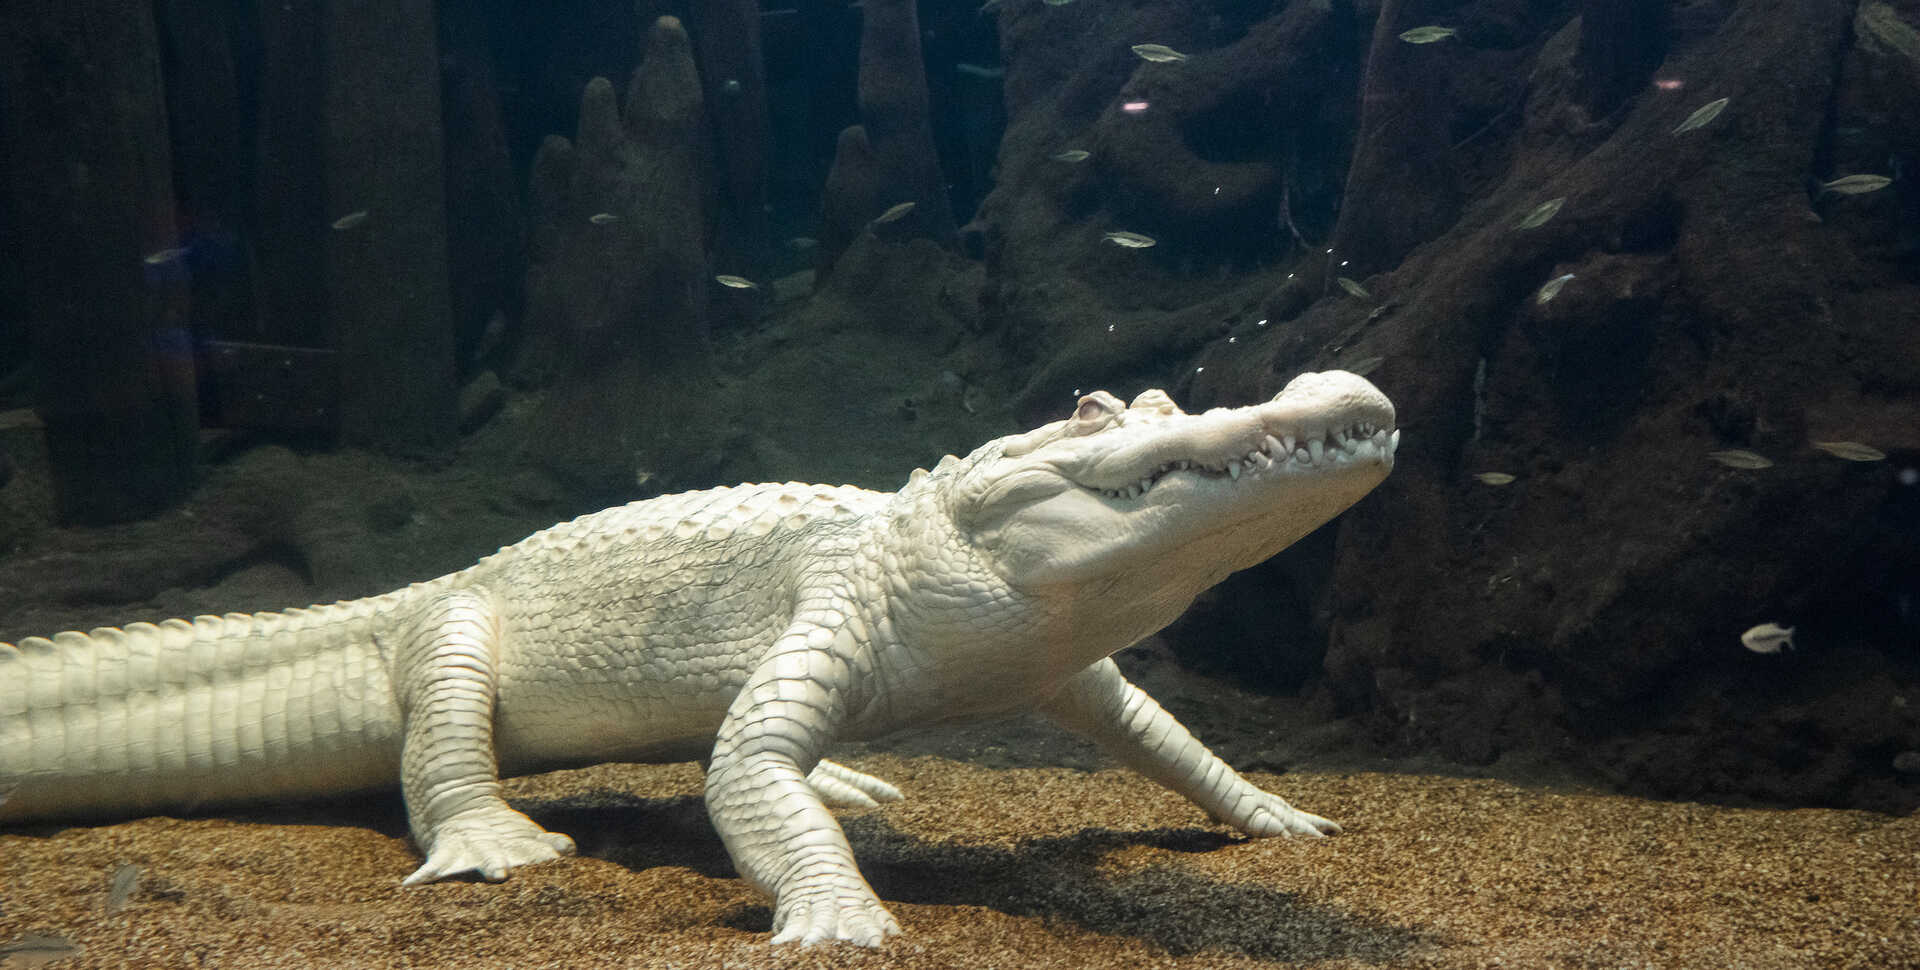 Claude the alligator chills out underwater